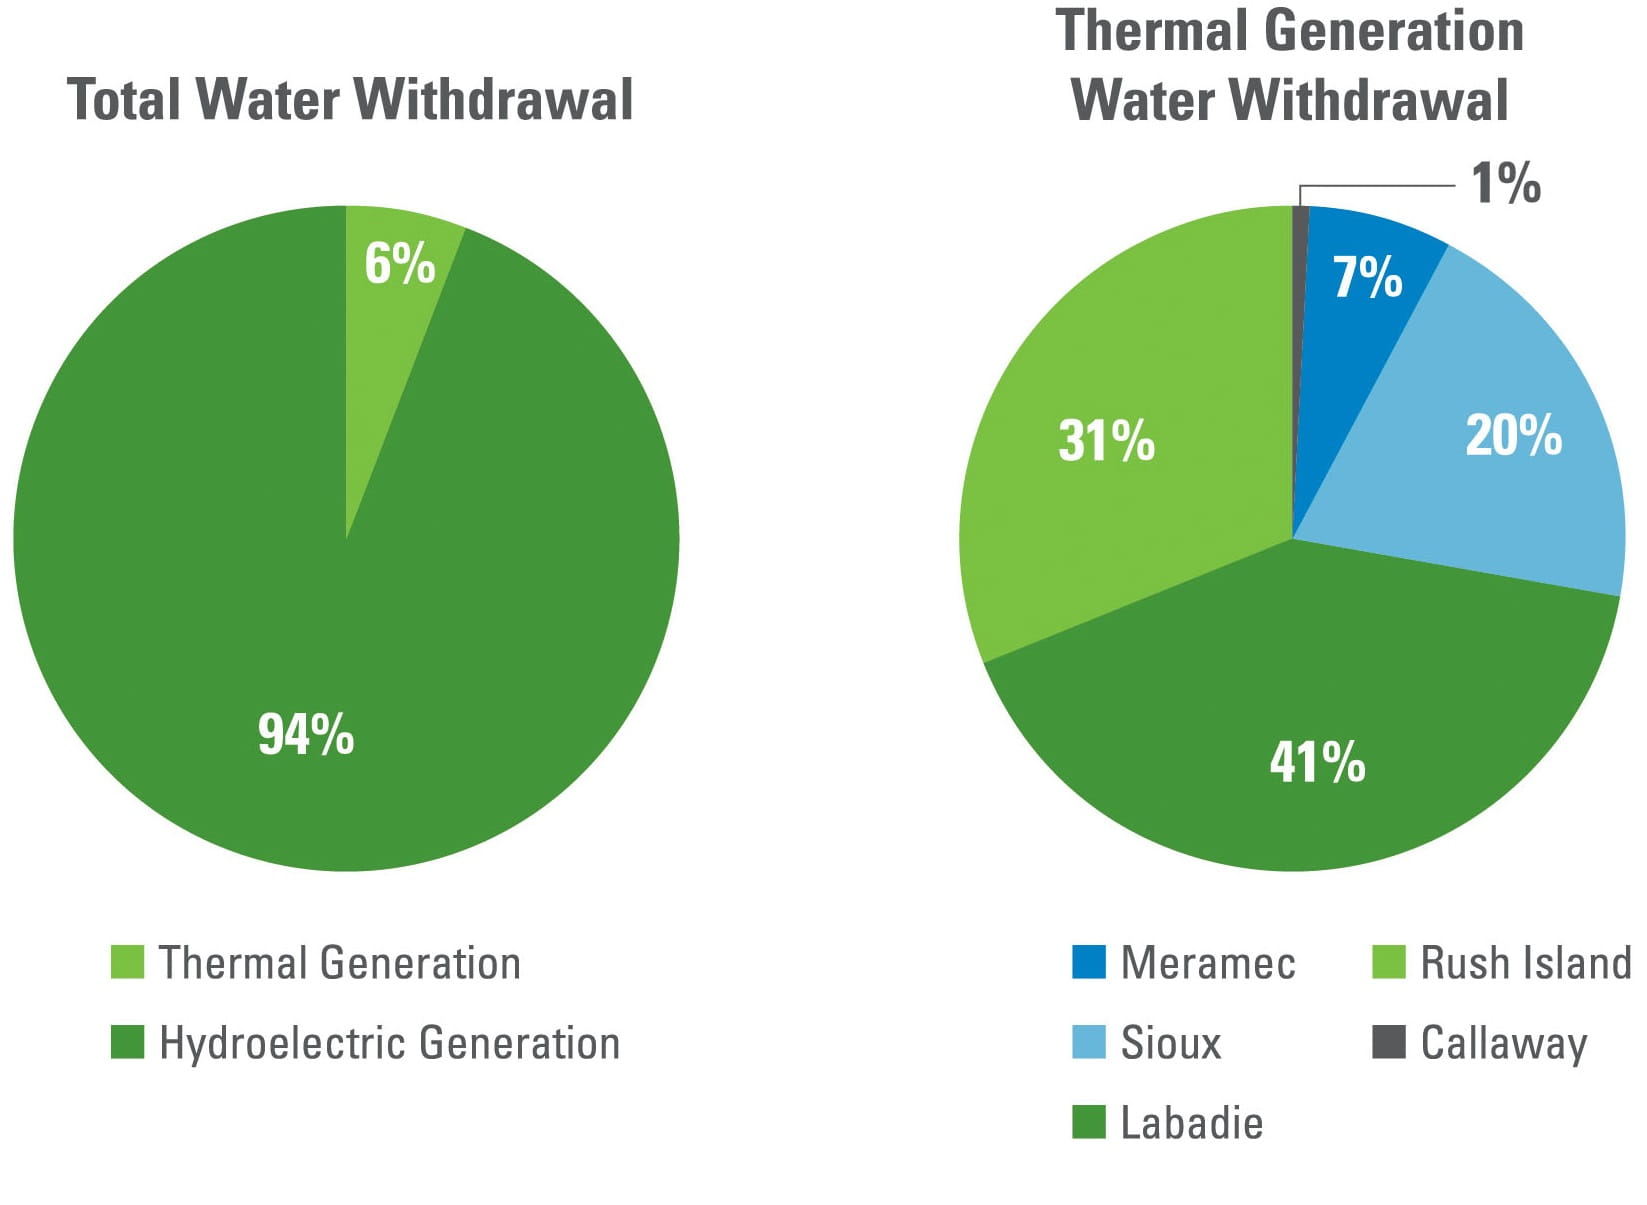 Total water withdrawal and thermal generation water withdrawal pie charts. 